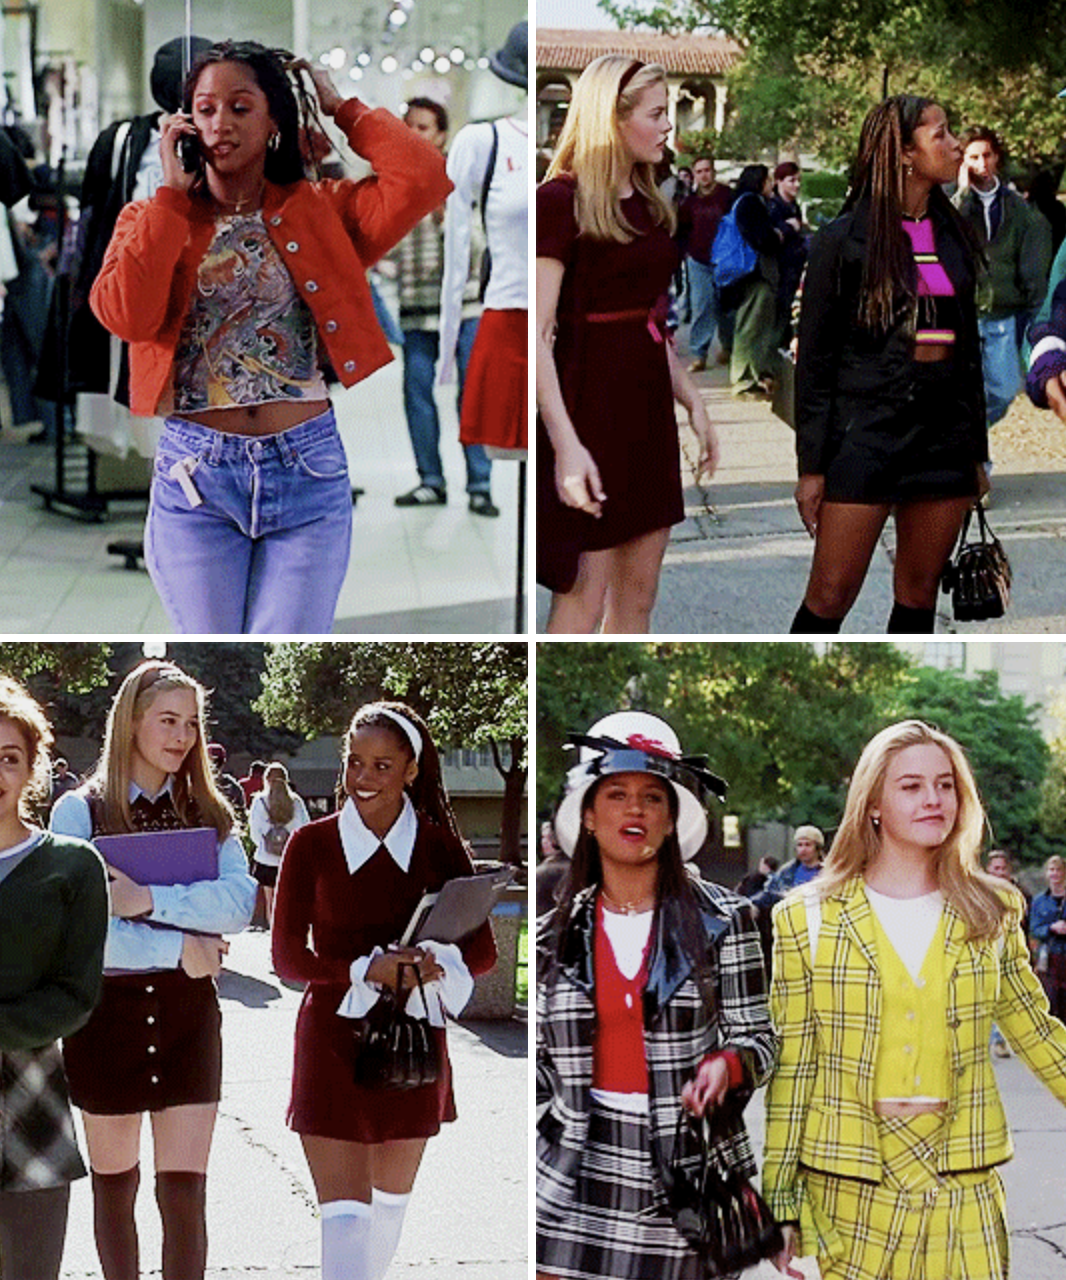 Cher and Dionne from &quot;Clueless&quot; wearing vibrant, expensive-looking outfits